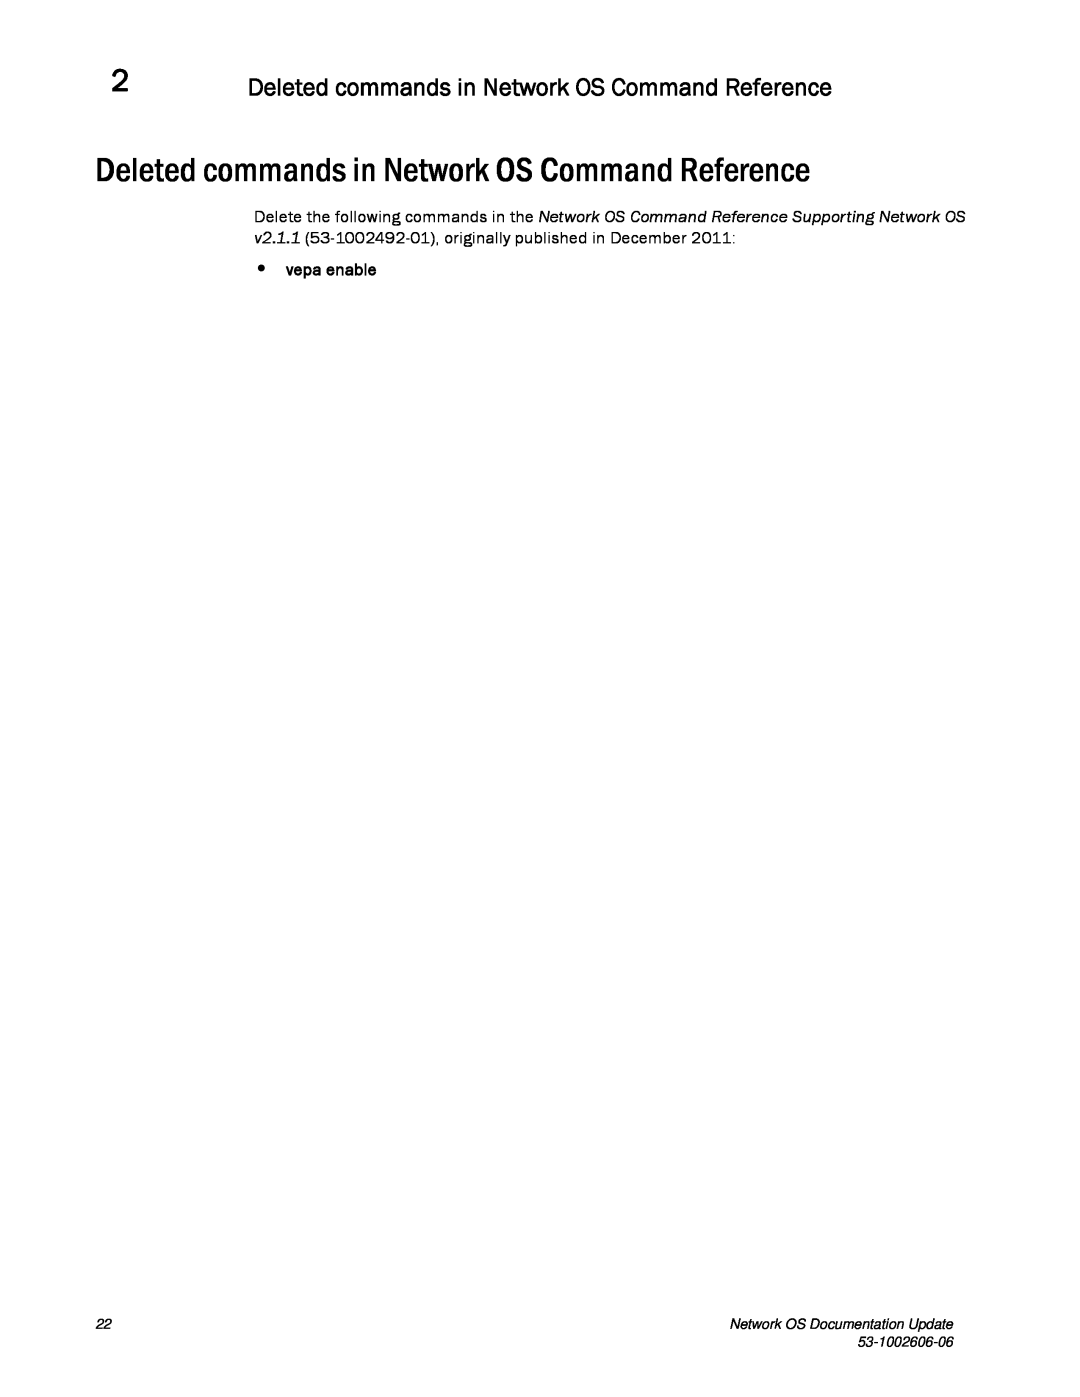 Brocade Communications Systems 2.1 manual Deleted commands in Network OS Command Reference, Network OS Documentation Update 